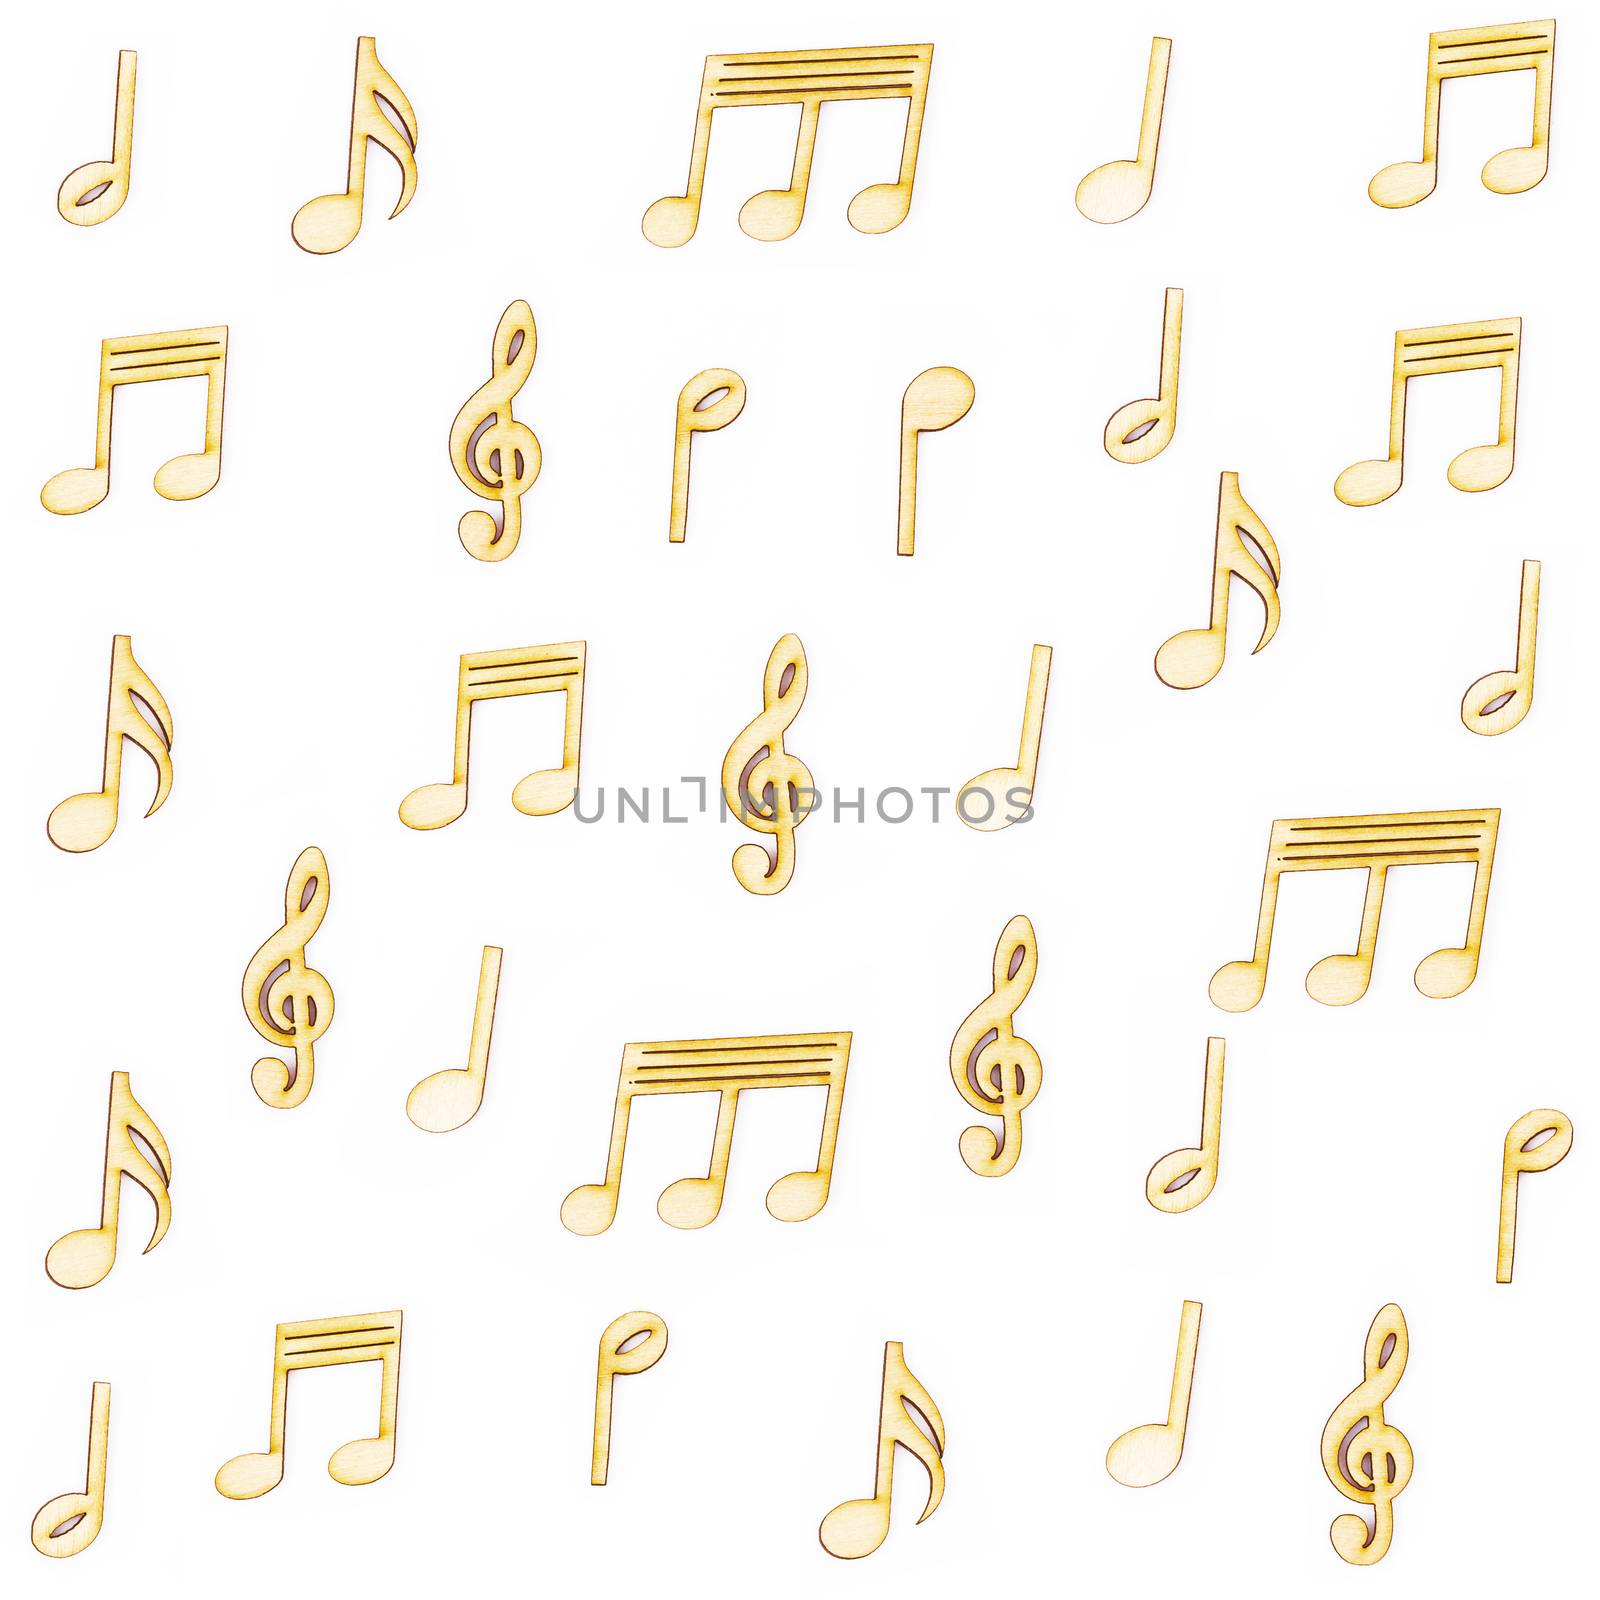 Wooden Music notes isolated on white background.